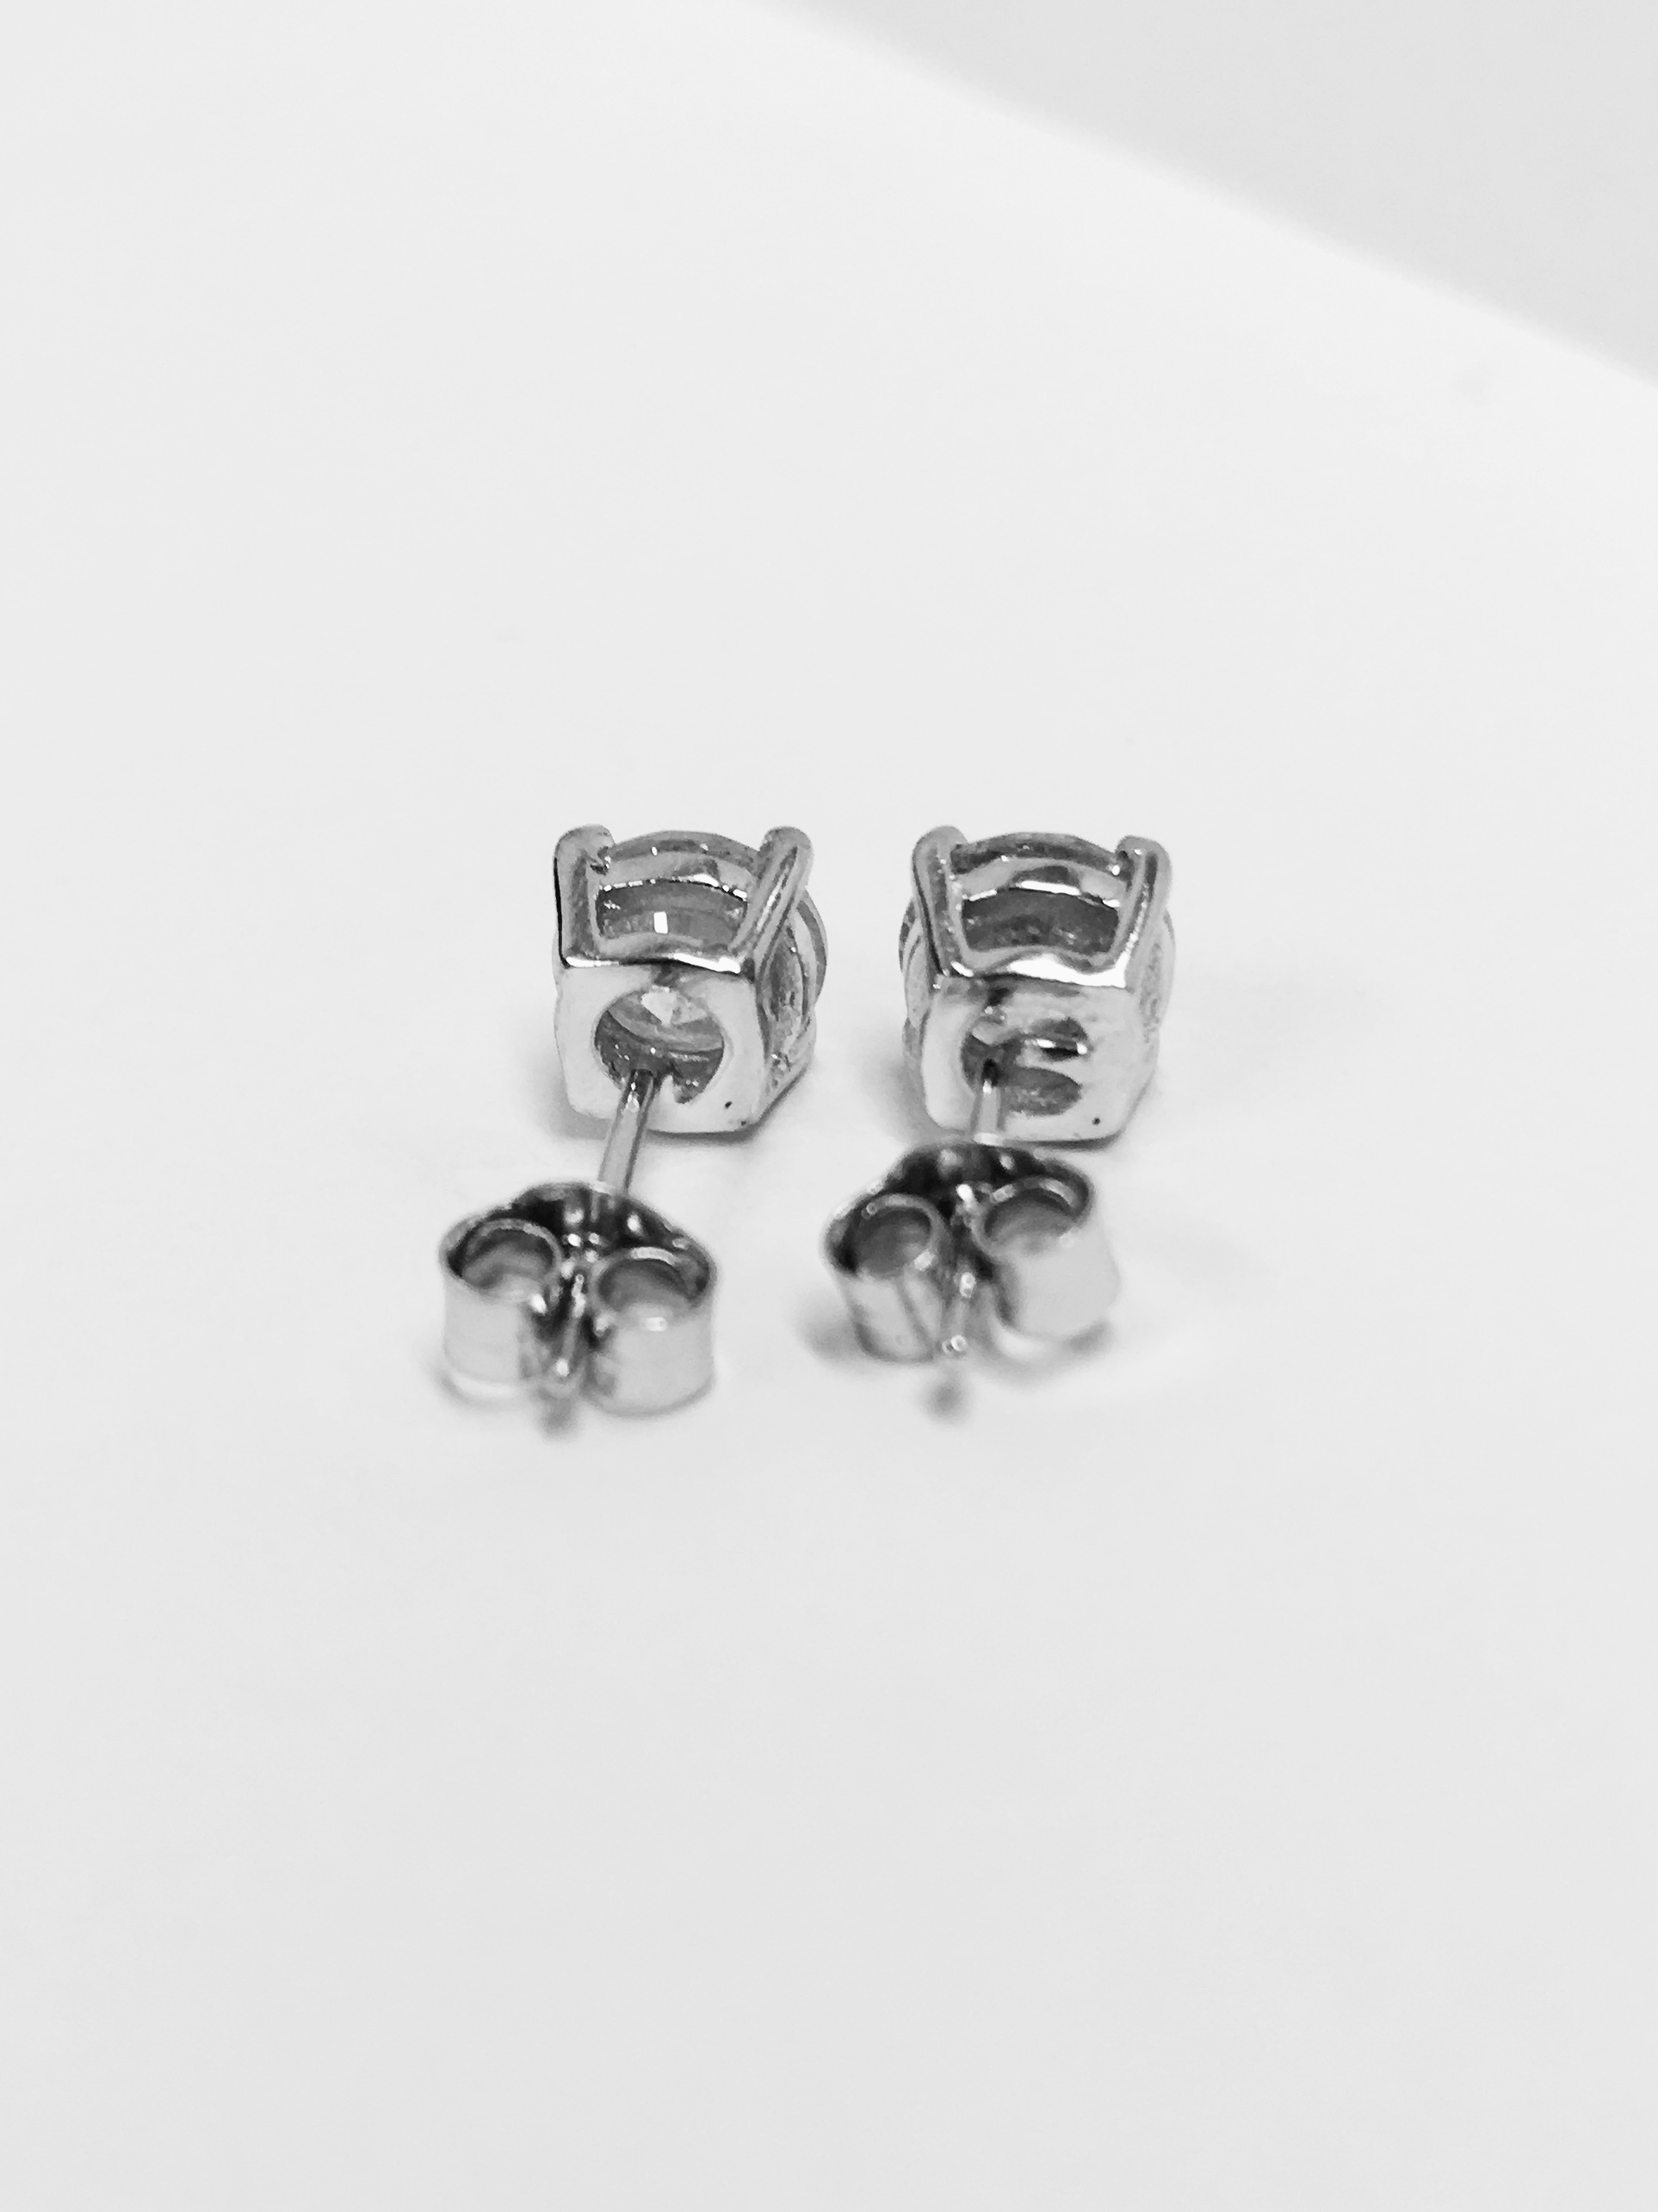 2.02Ct Solitaire Diamond Stud Earrings Set With Brilliant Cut Diamonds. - Image 3 of 3